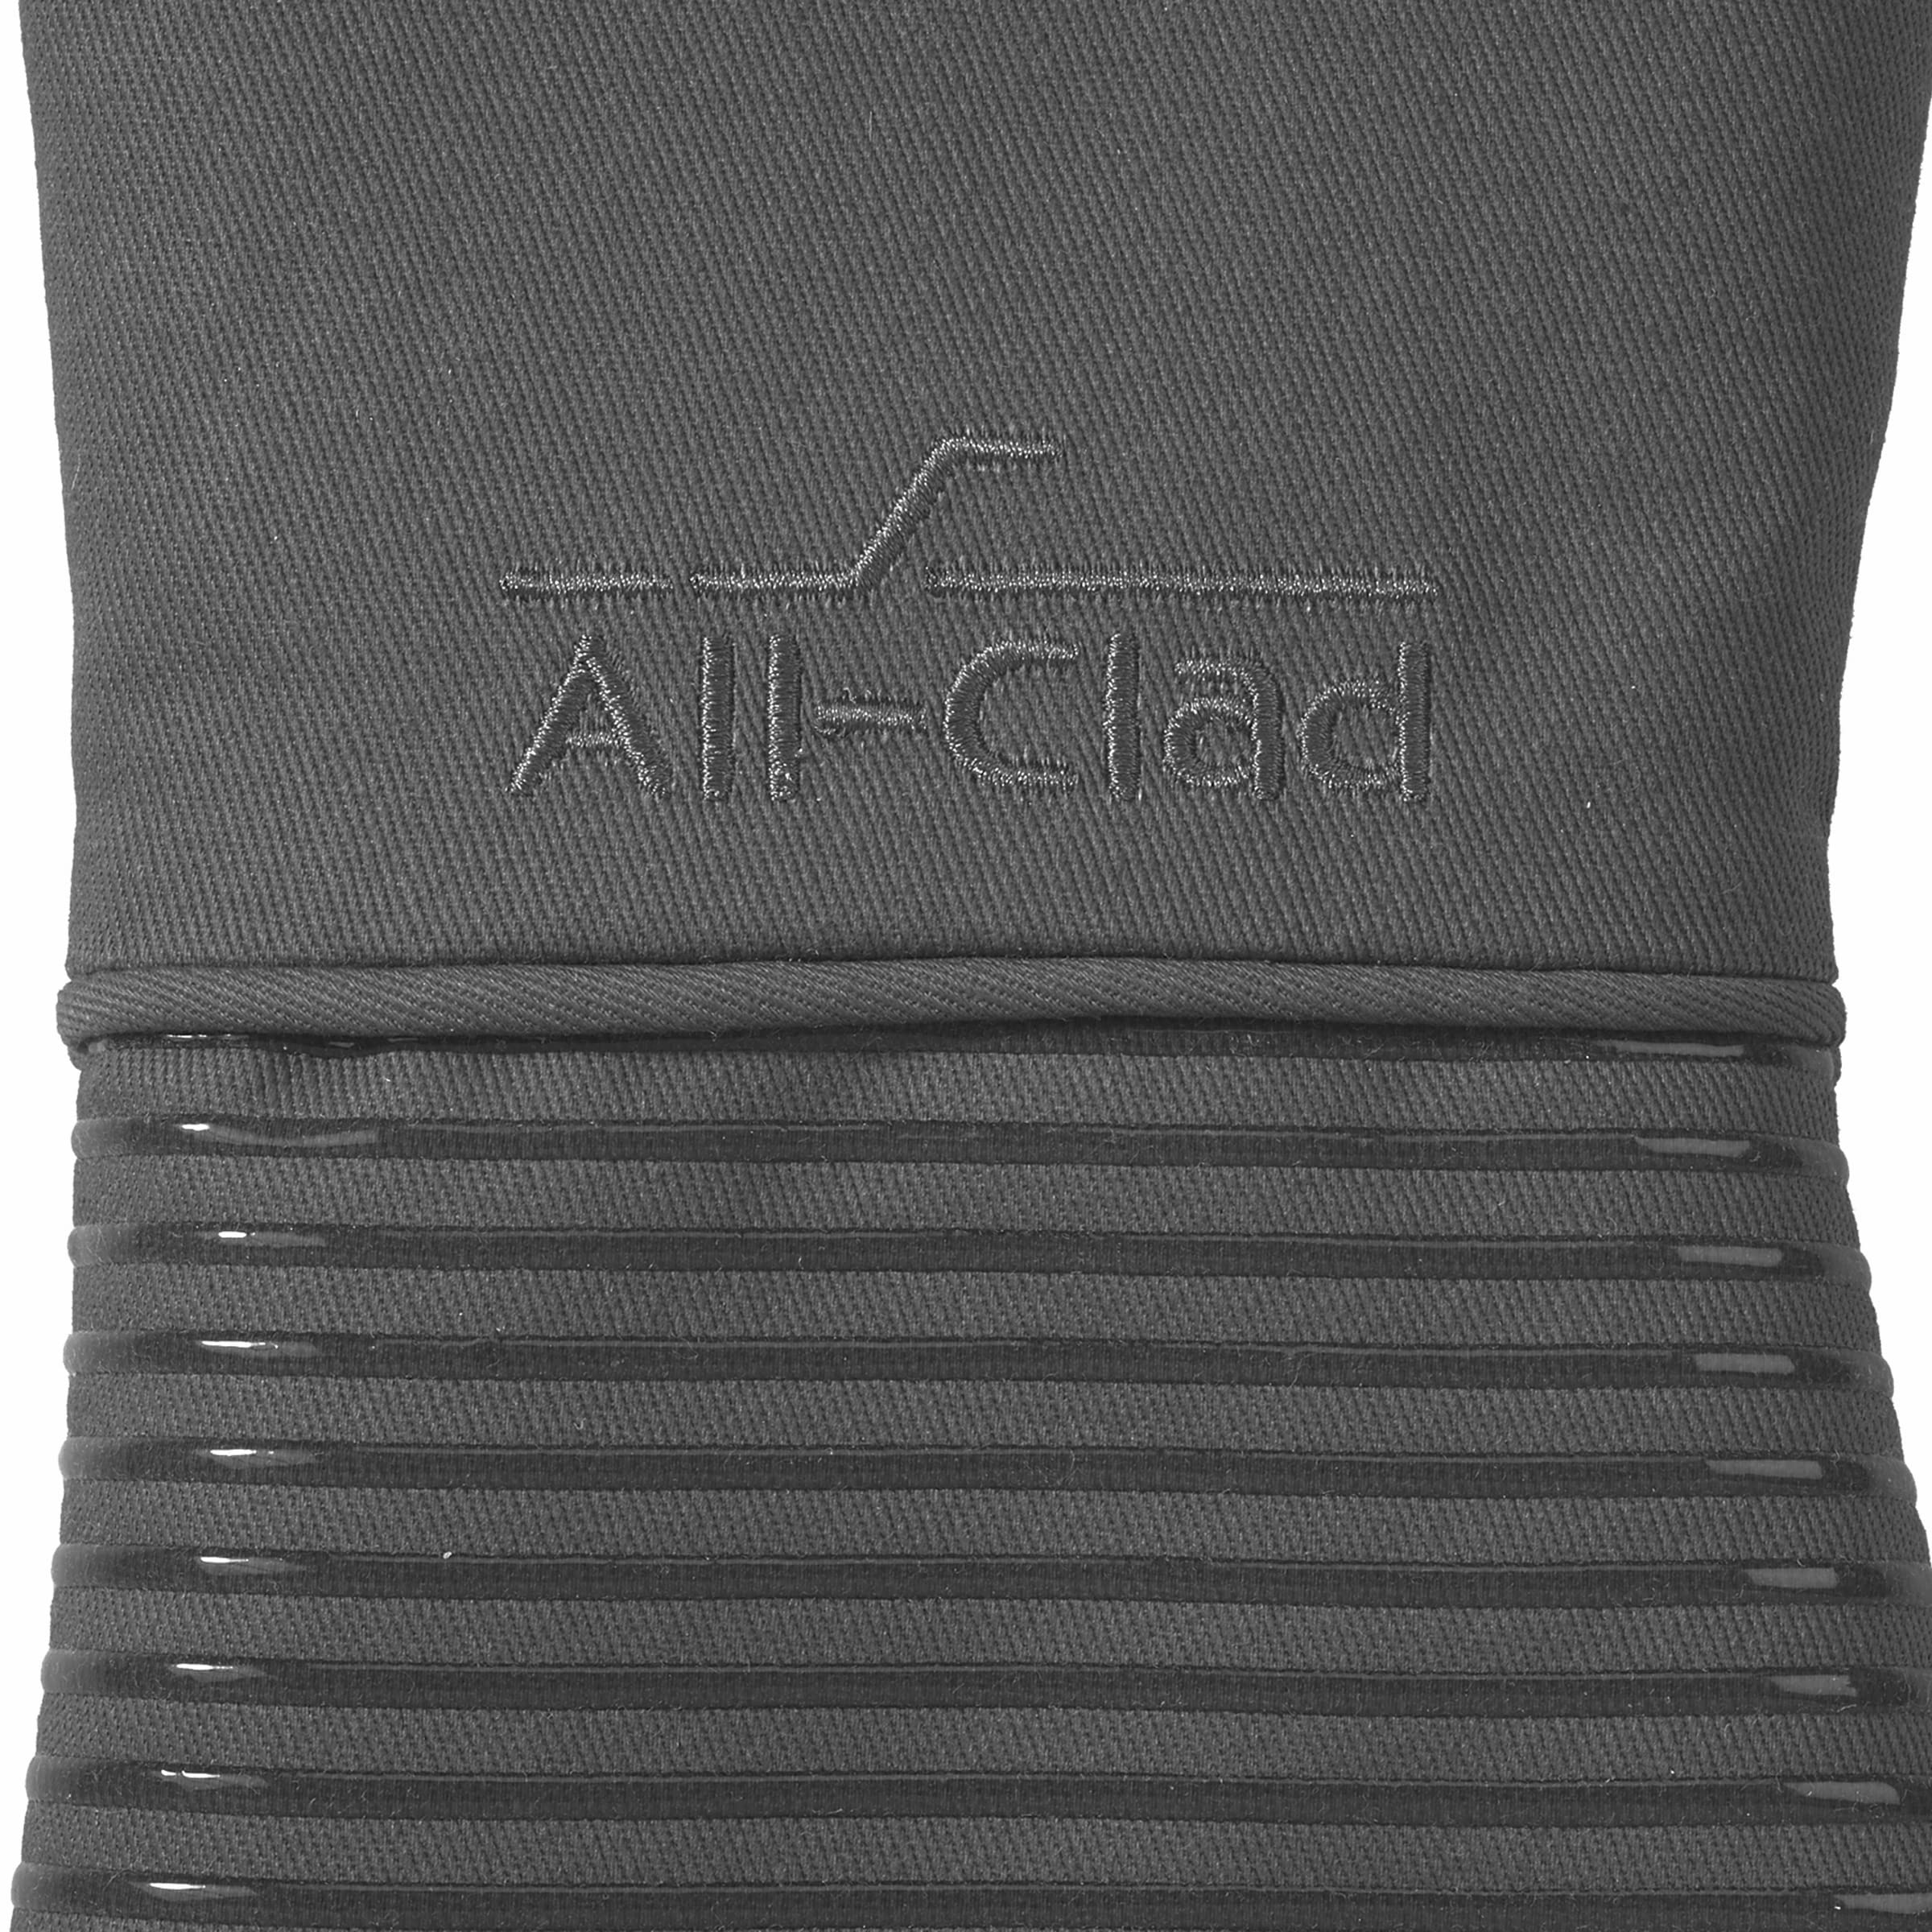 All-Clad Silicone Oven Mitt, 1 Pack, Pewter